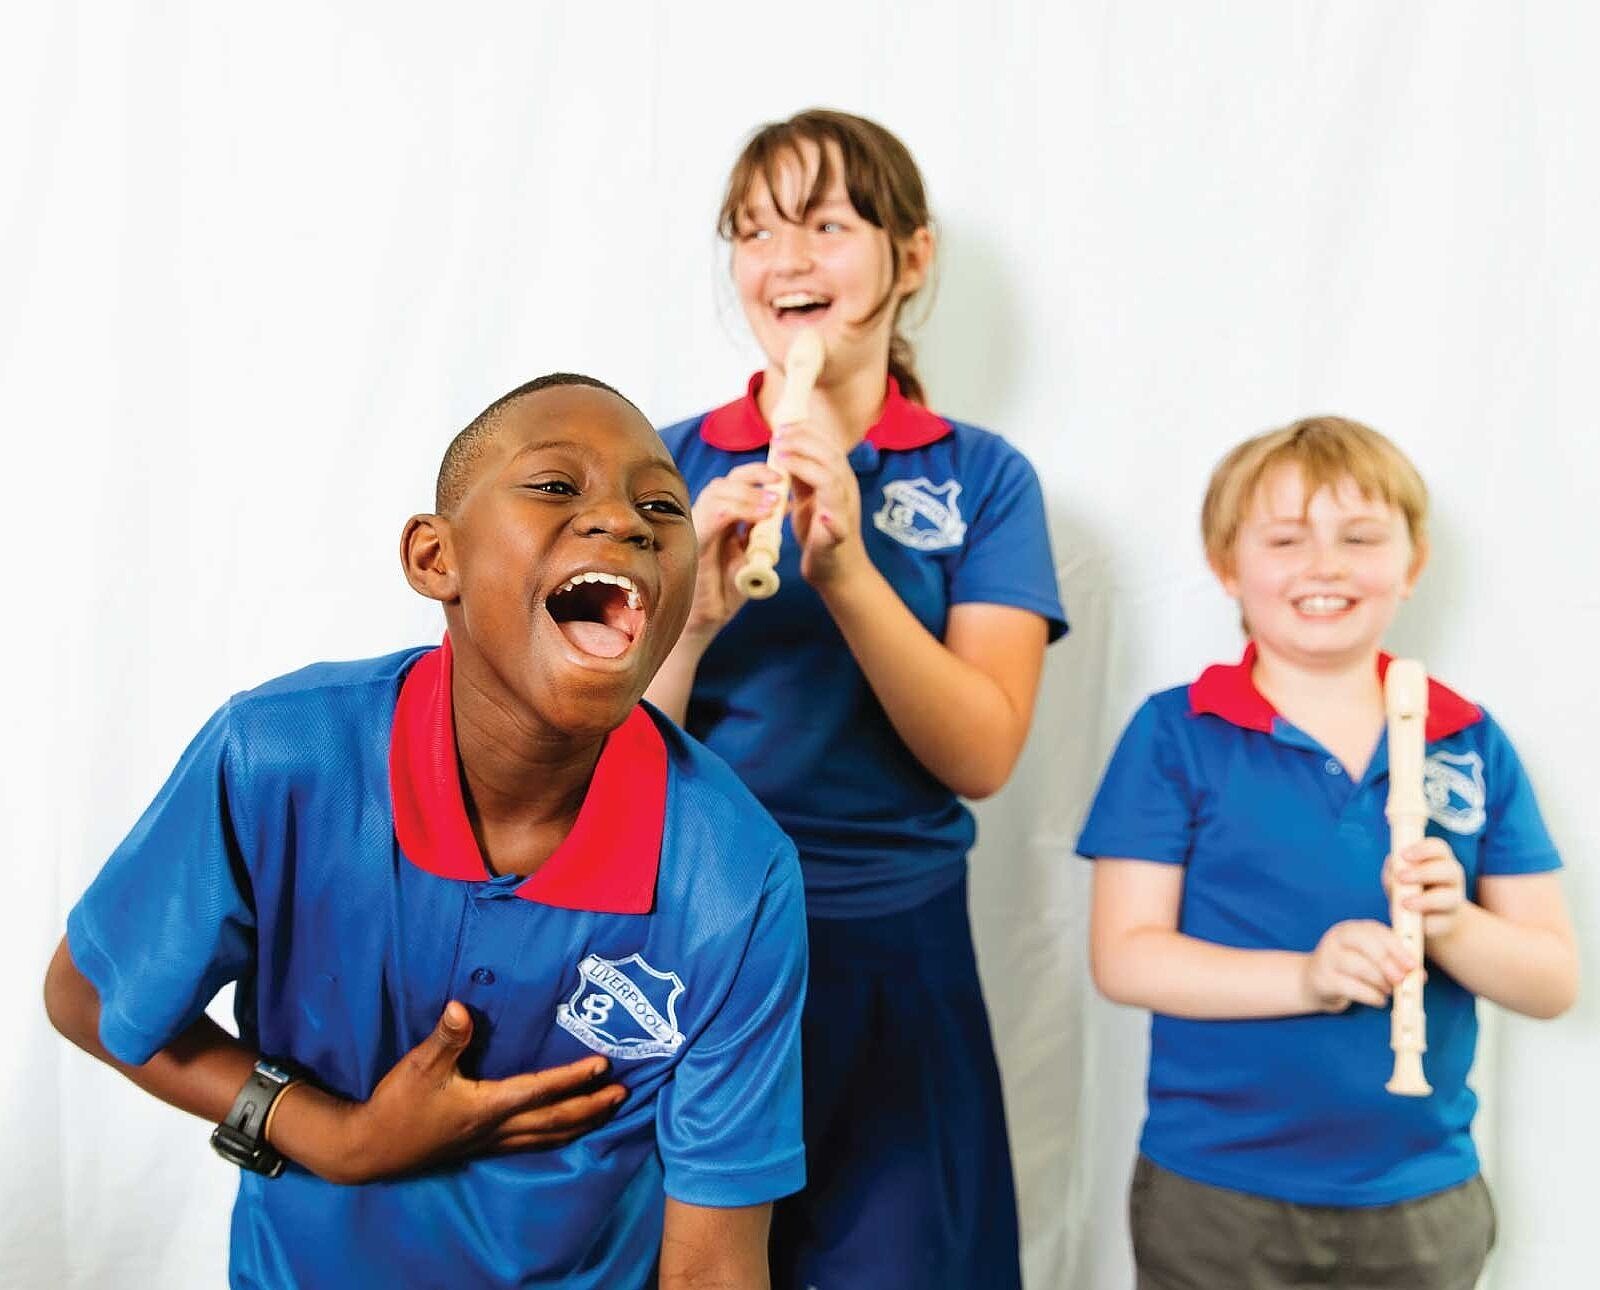 Three students in front of a white background. Two are playing the recorder and one is laughing to the camera.